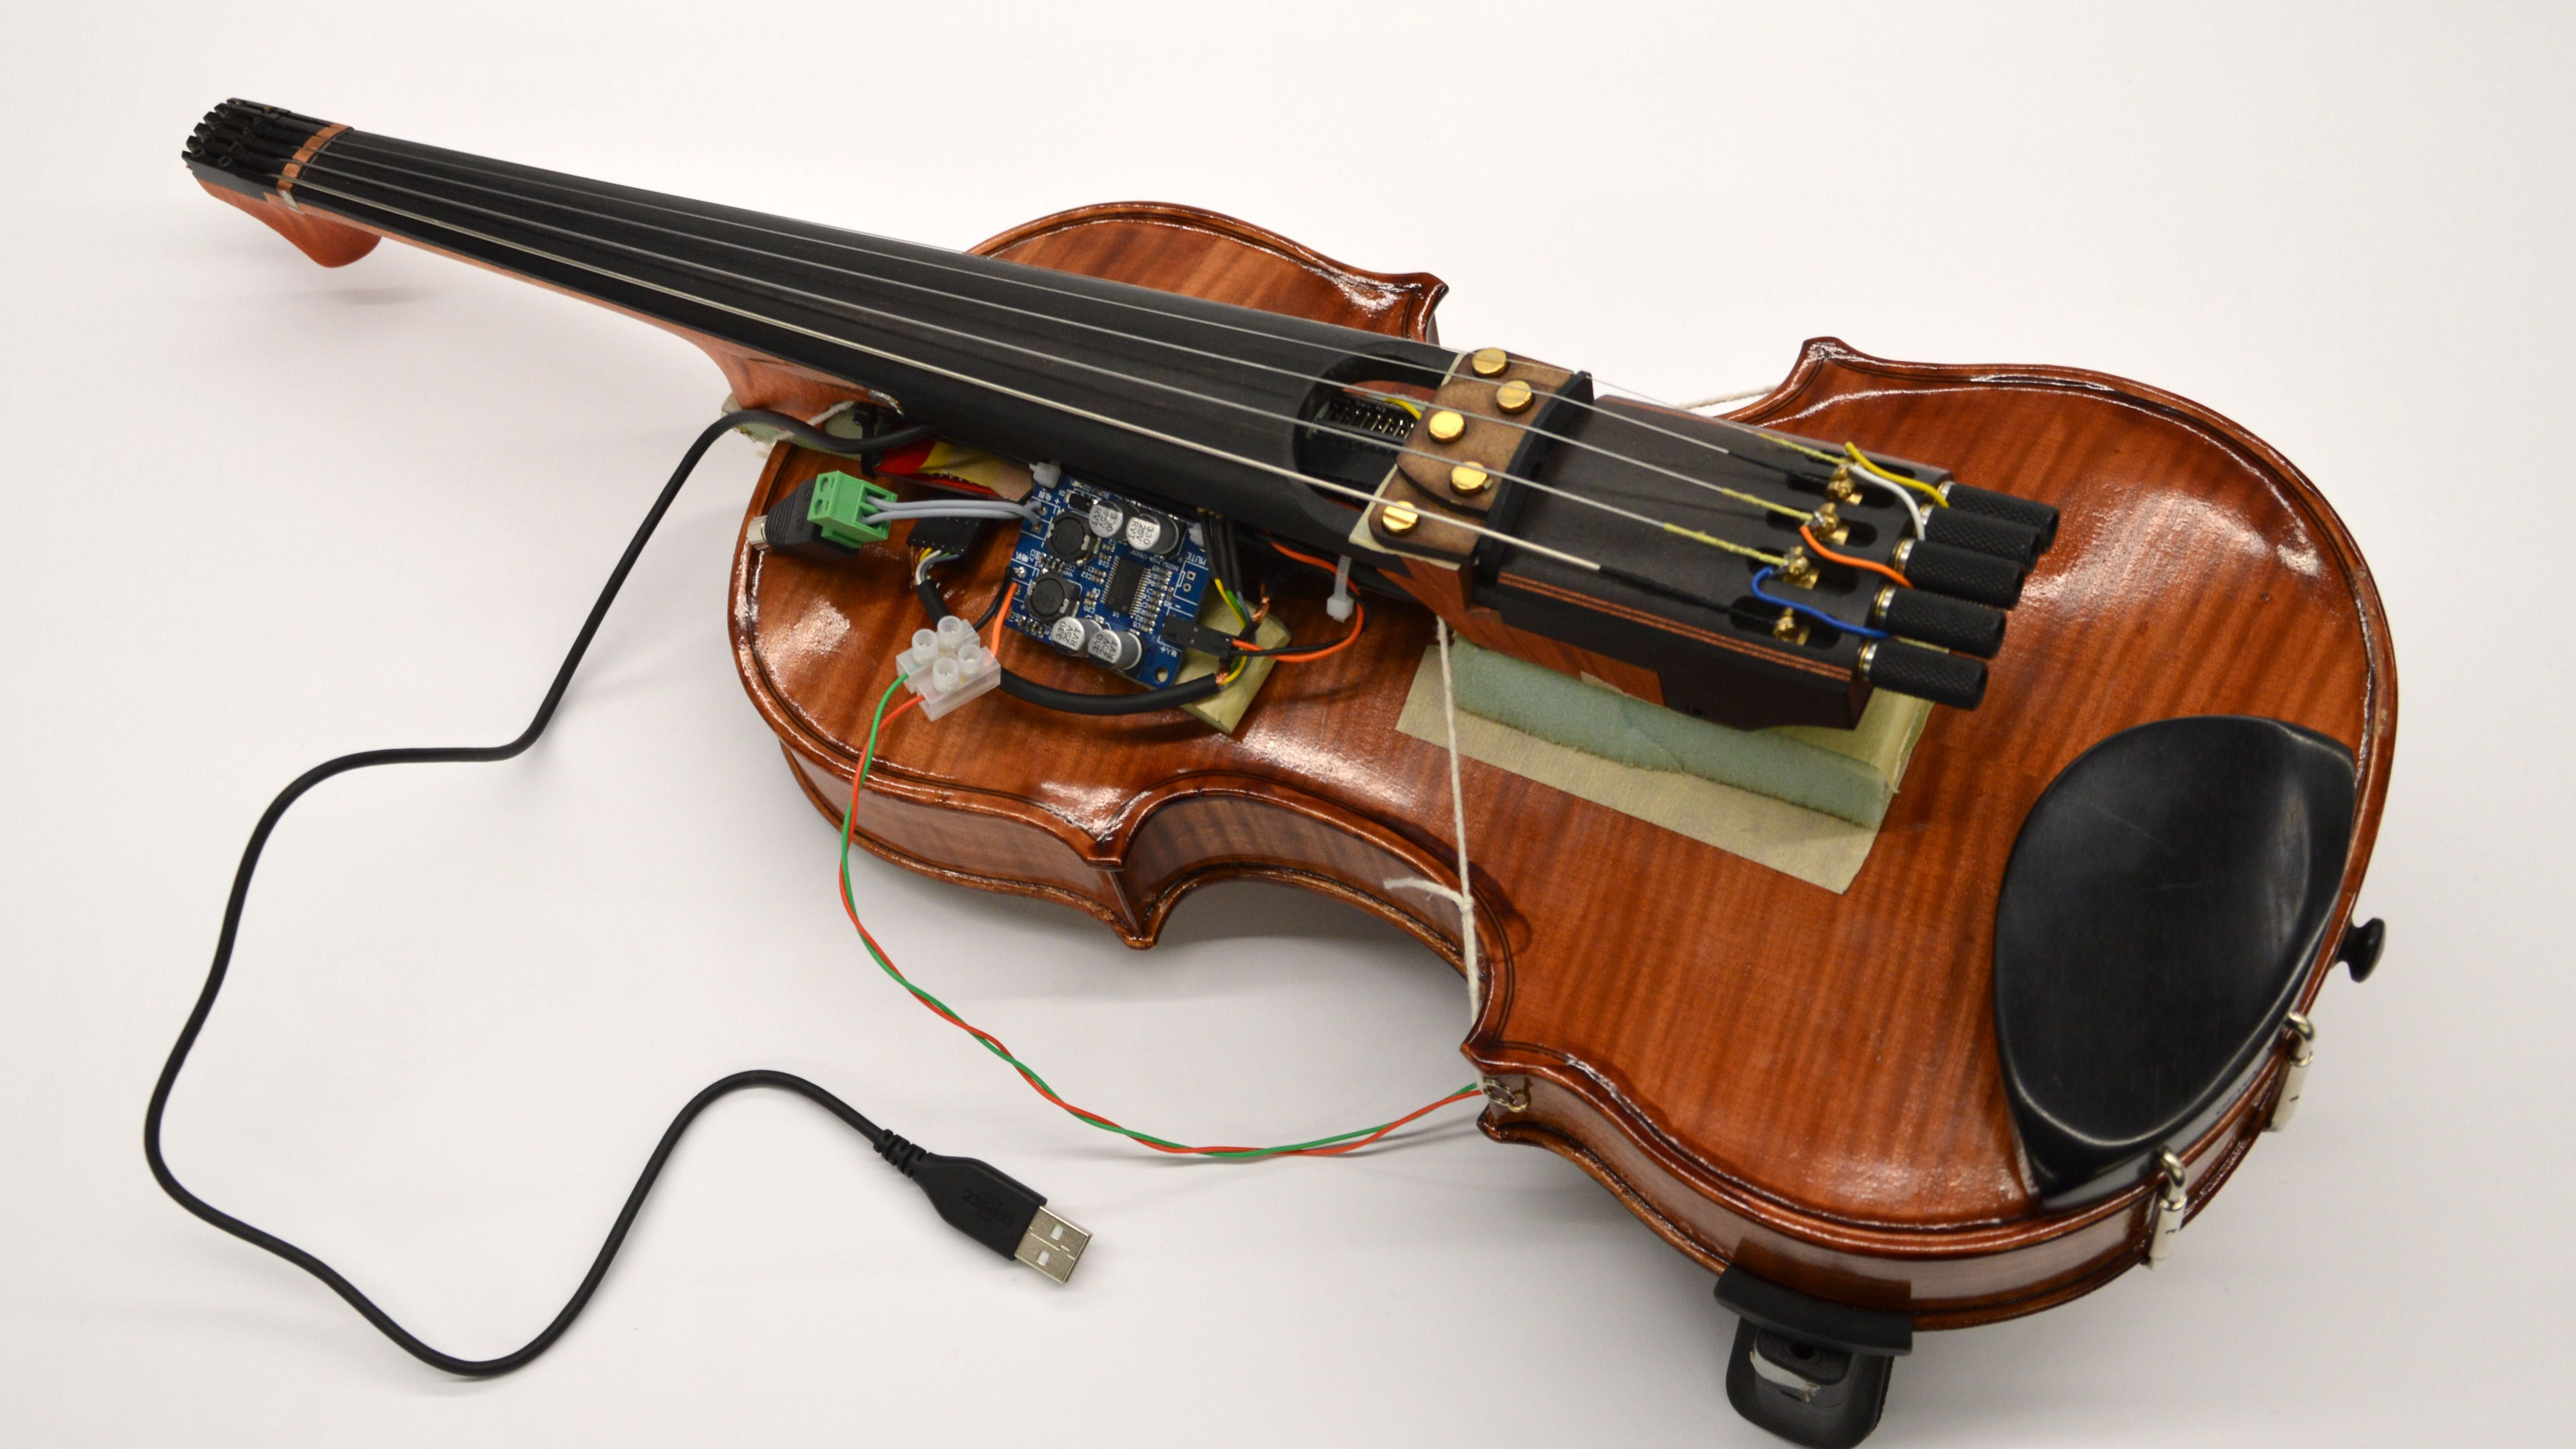 A close up picture of the Svampolin, a heavily modified violin.